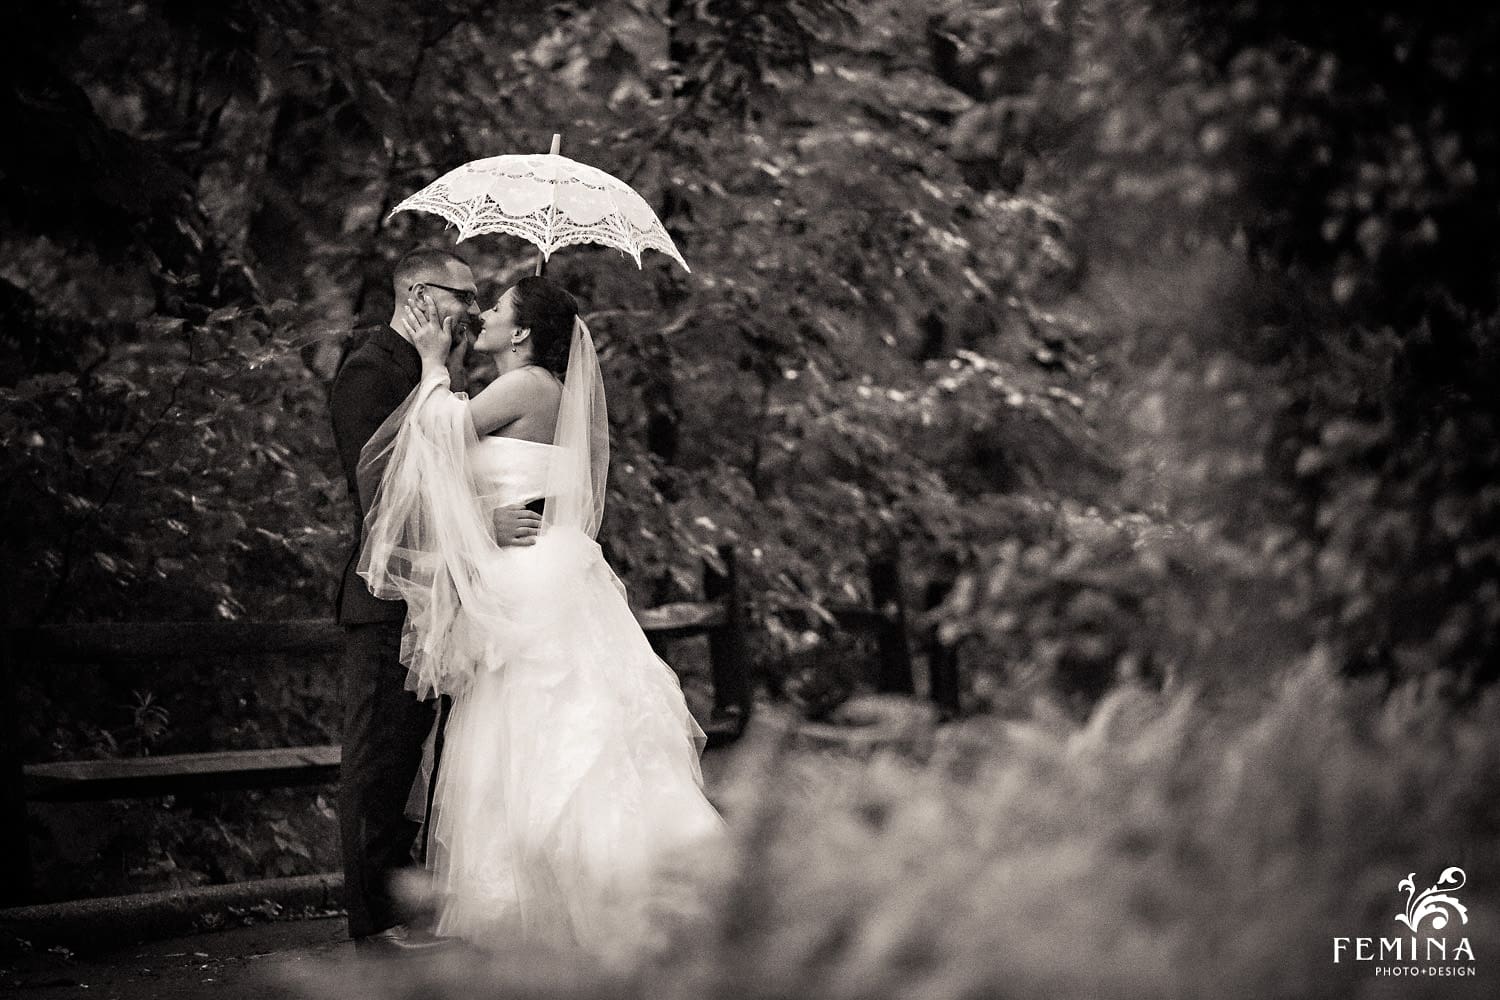 Marijela and Steven hold each other and smile under their umbrella